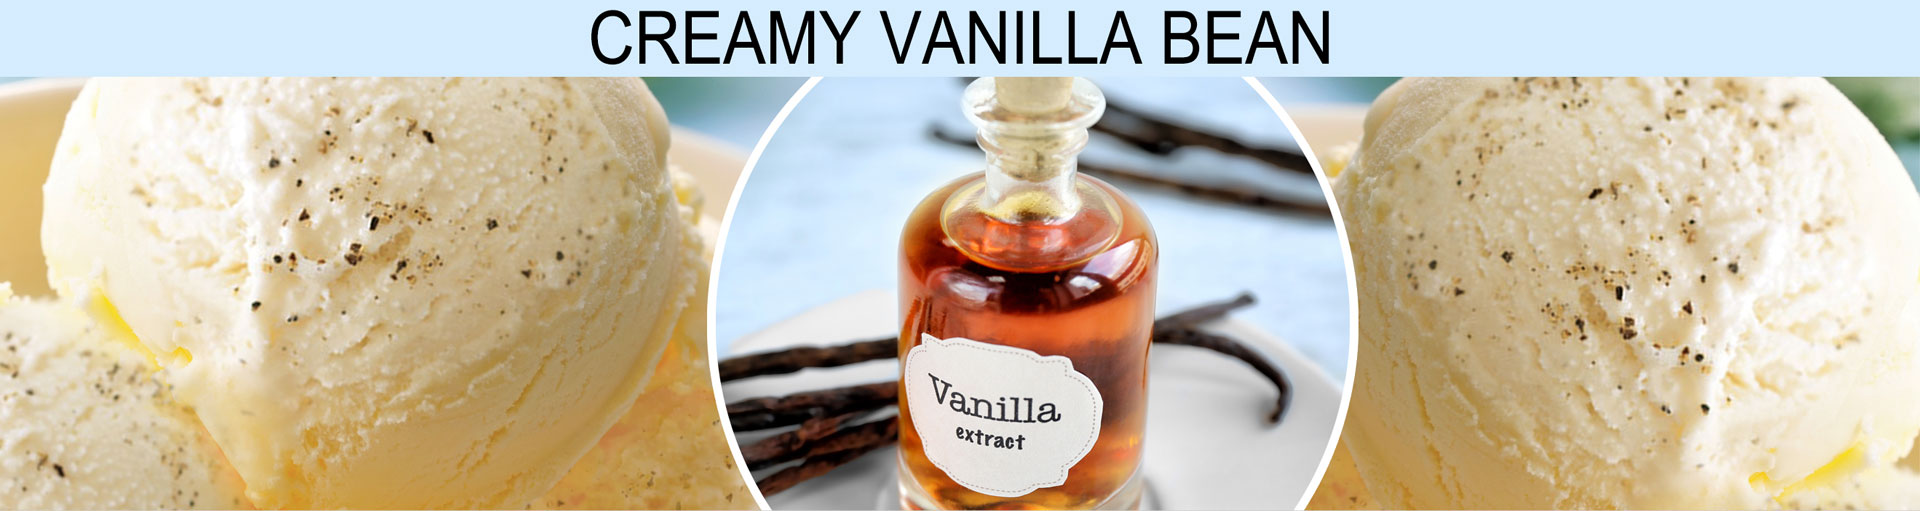 Banner image of A buttery top note sweetened with anise & coconut infused with vanilla bean.